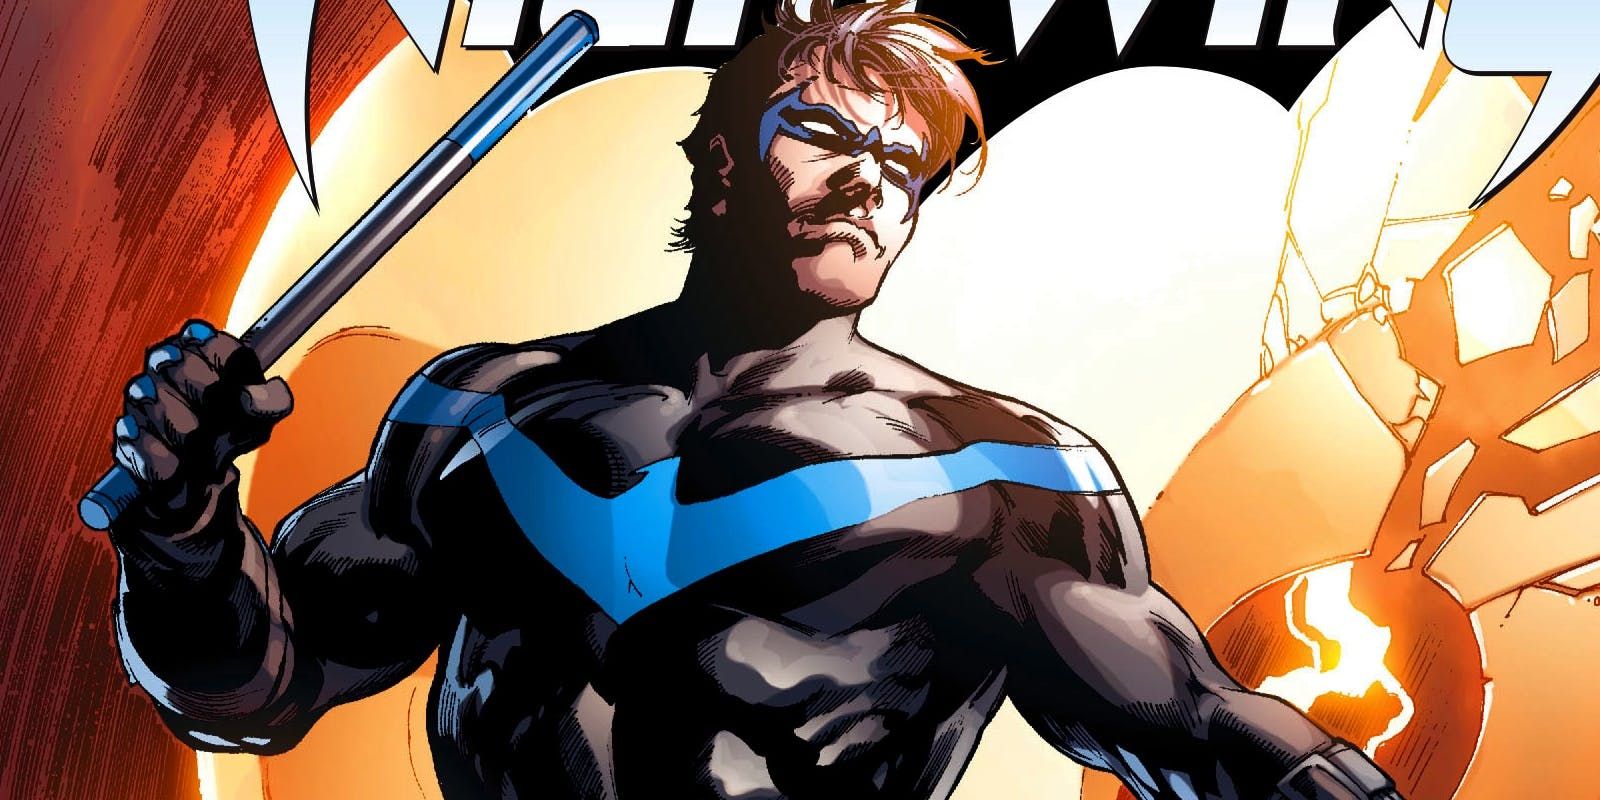 The cover of a Nightwing issue showing him in an attack position